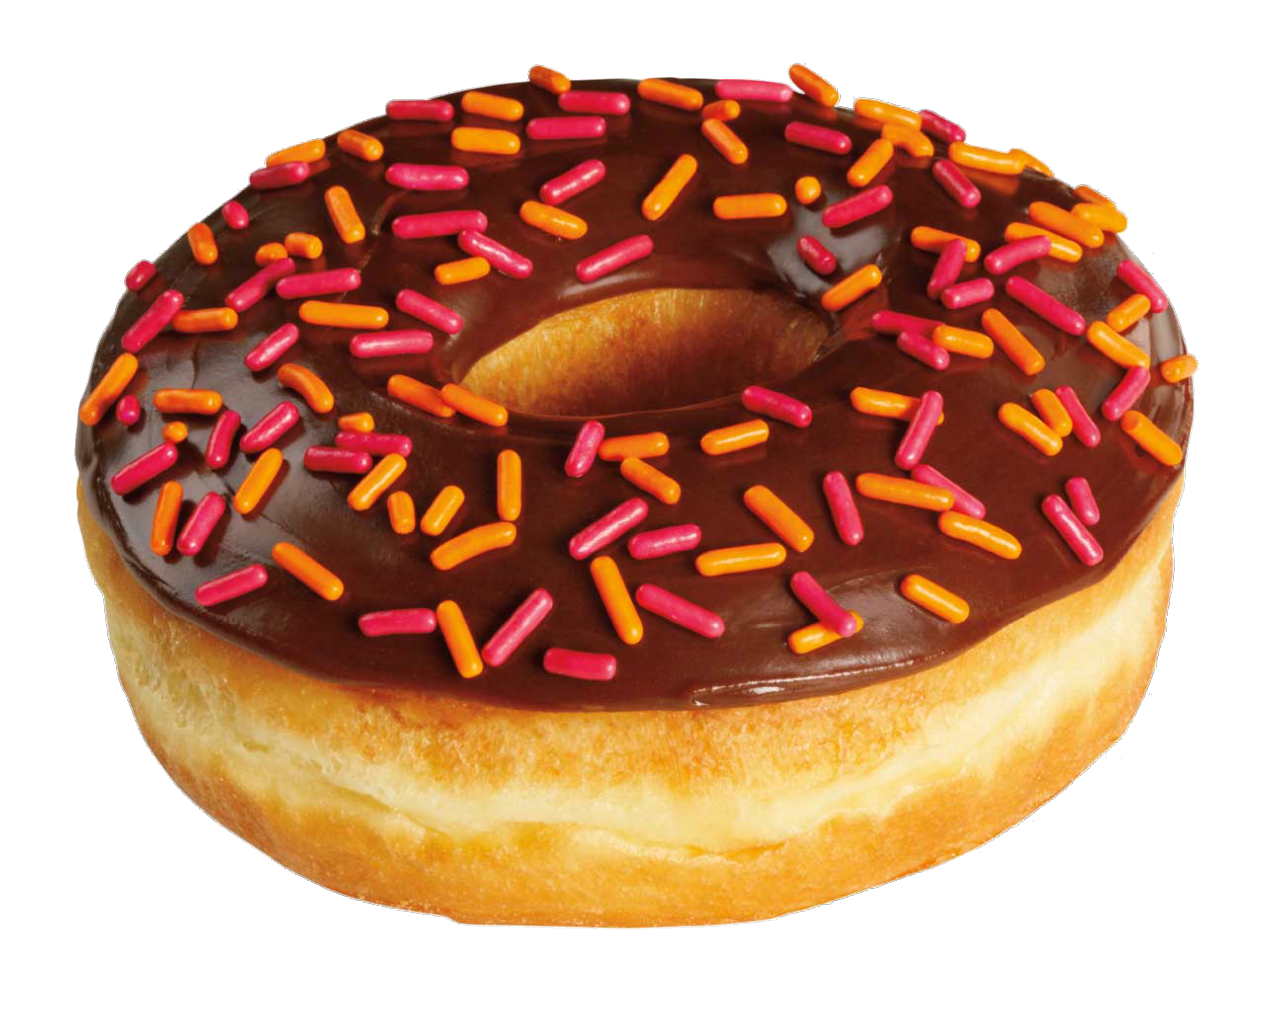 And Coffee Dunkin' Donuts Doughnuts Bagel Donut PNG Image